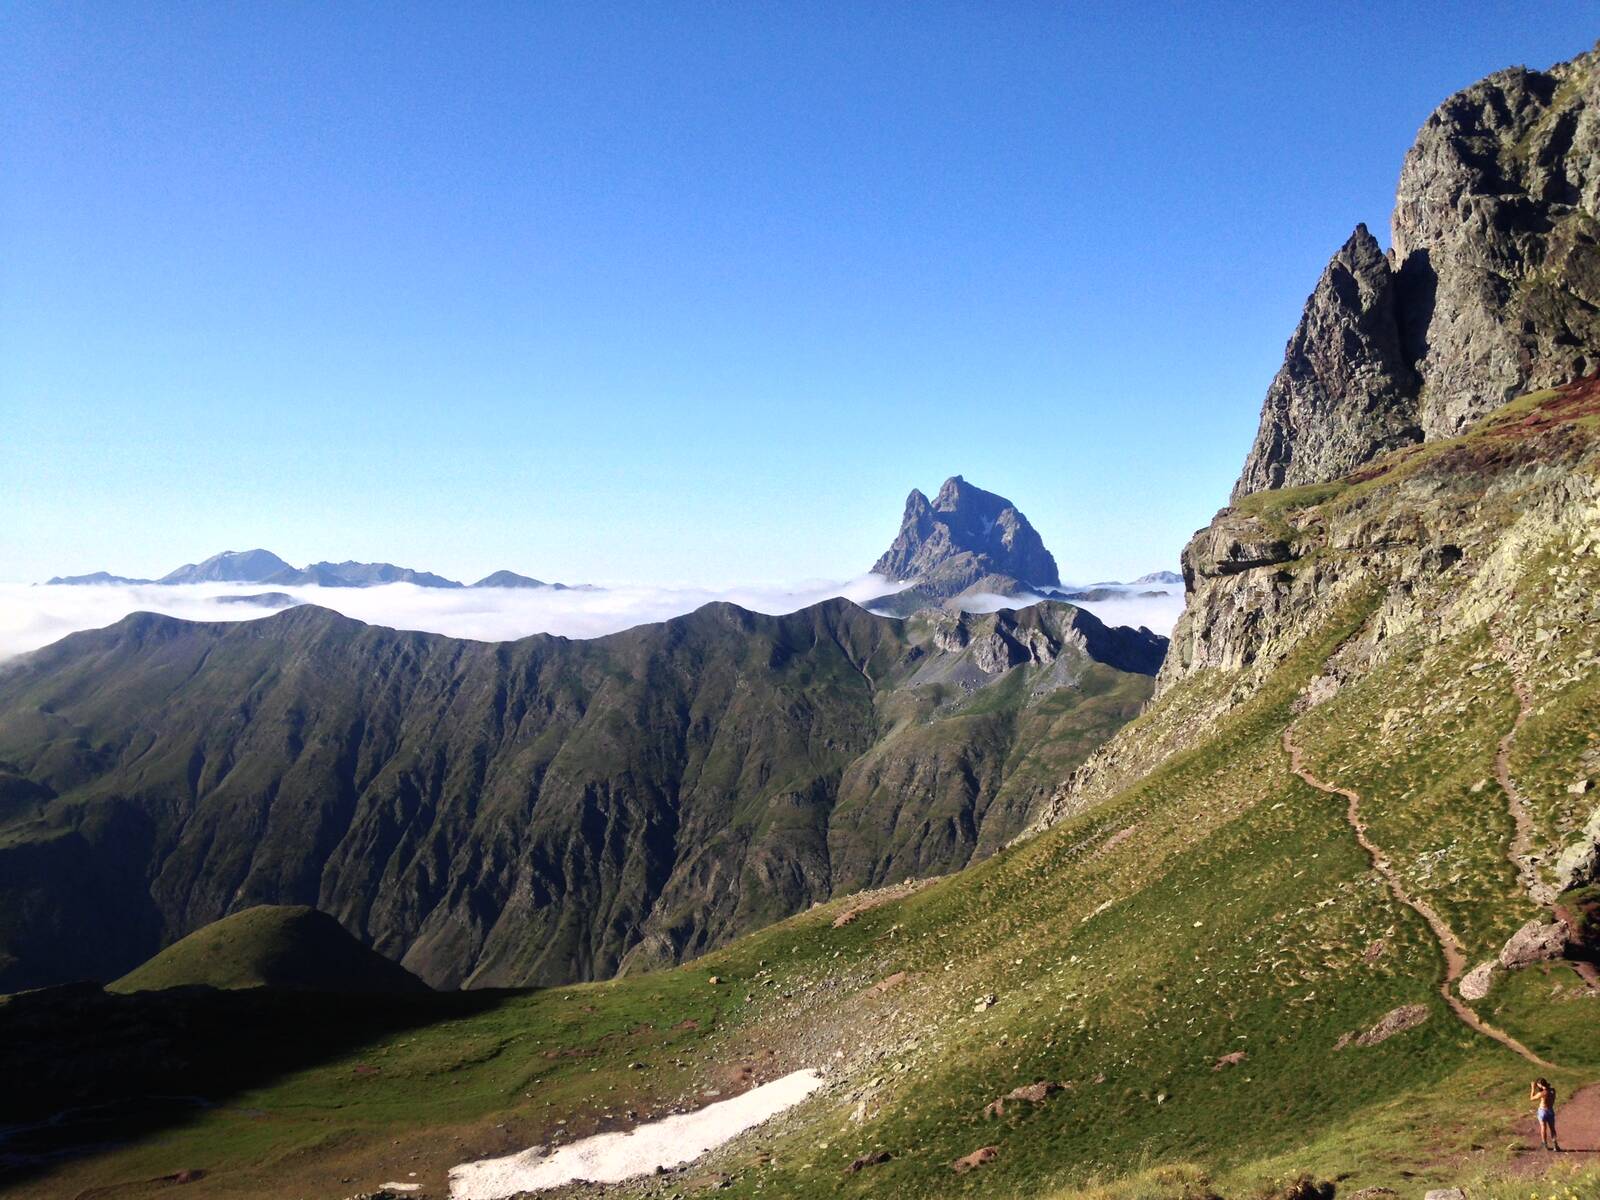 Midi-d'Ossau and Anayet in the Pyrenees